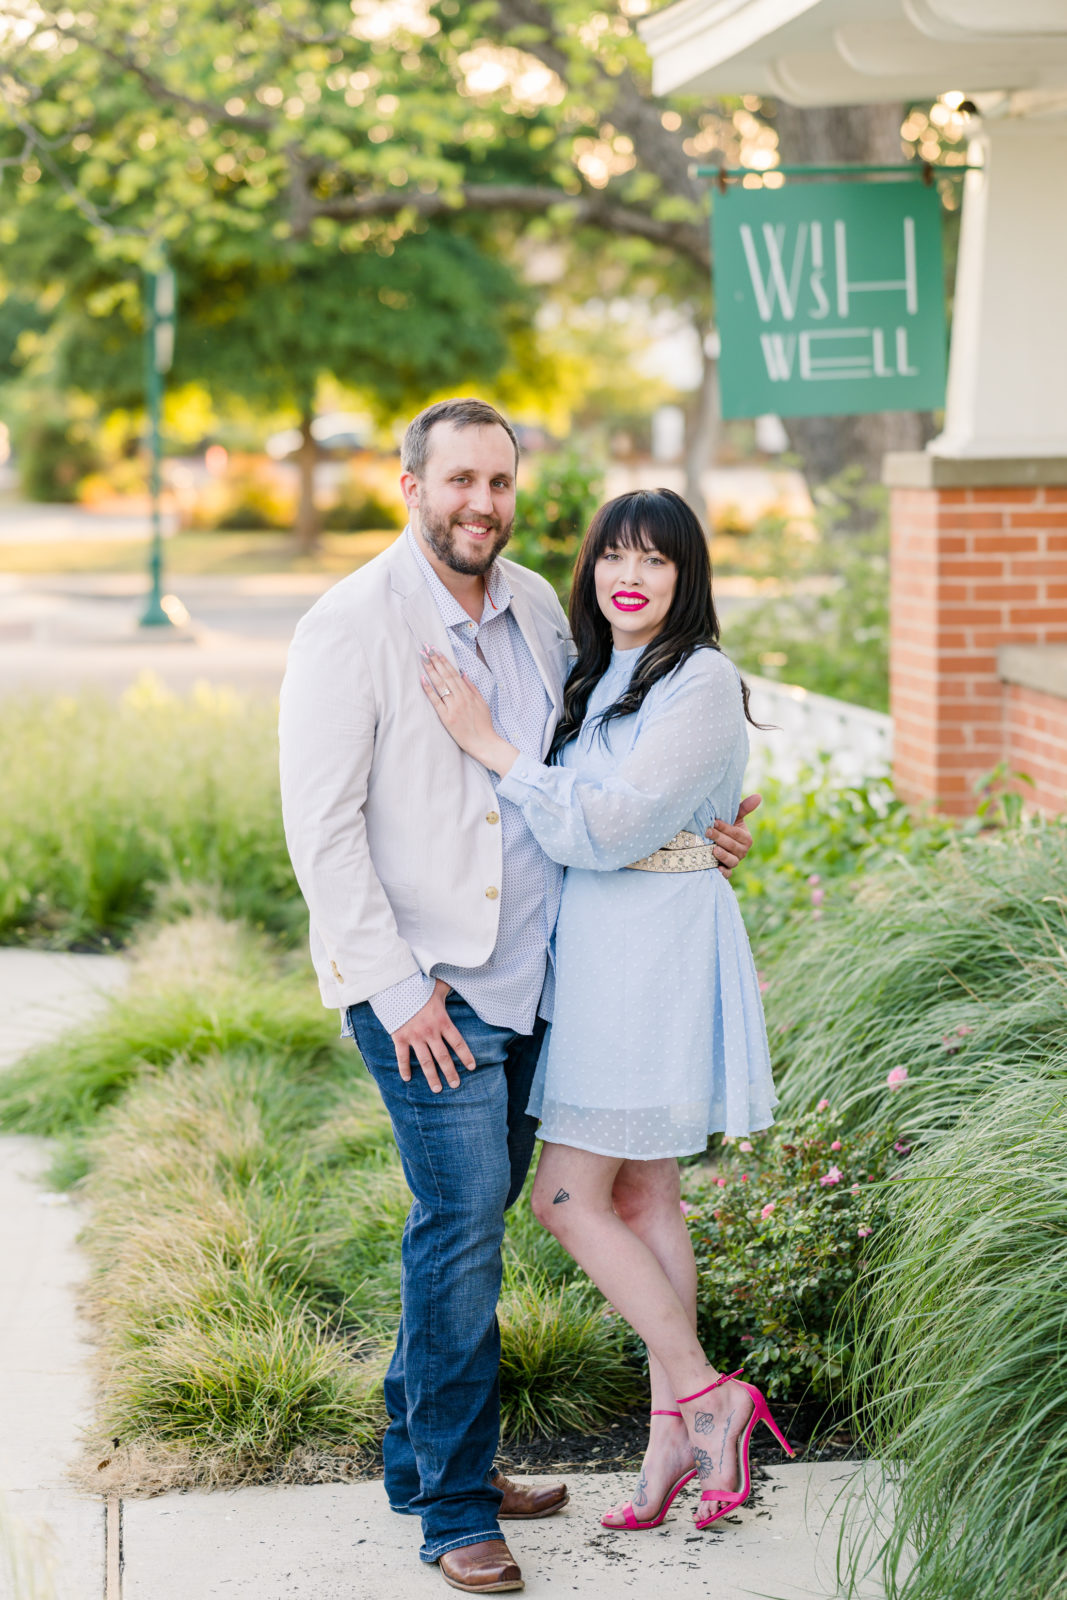 Wish Well House Engagement Photographer